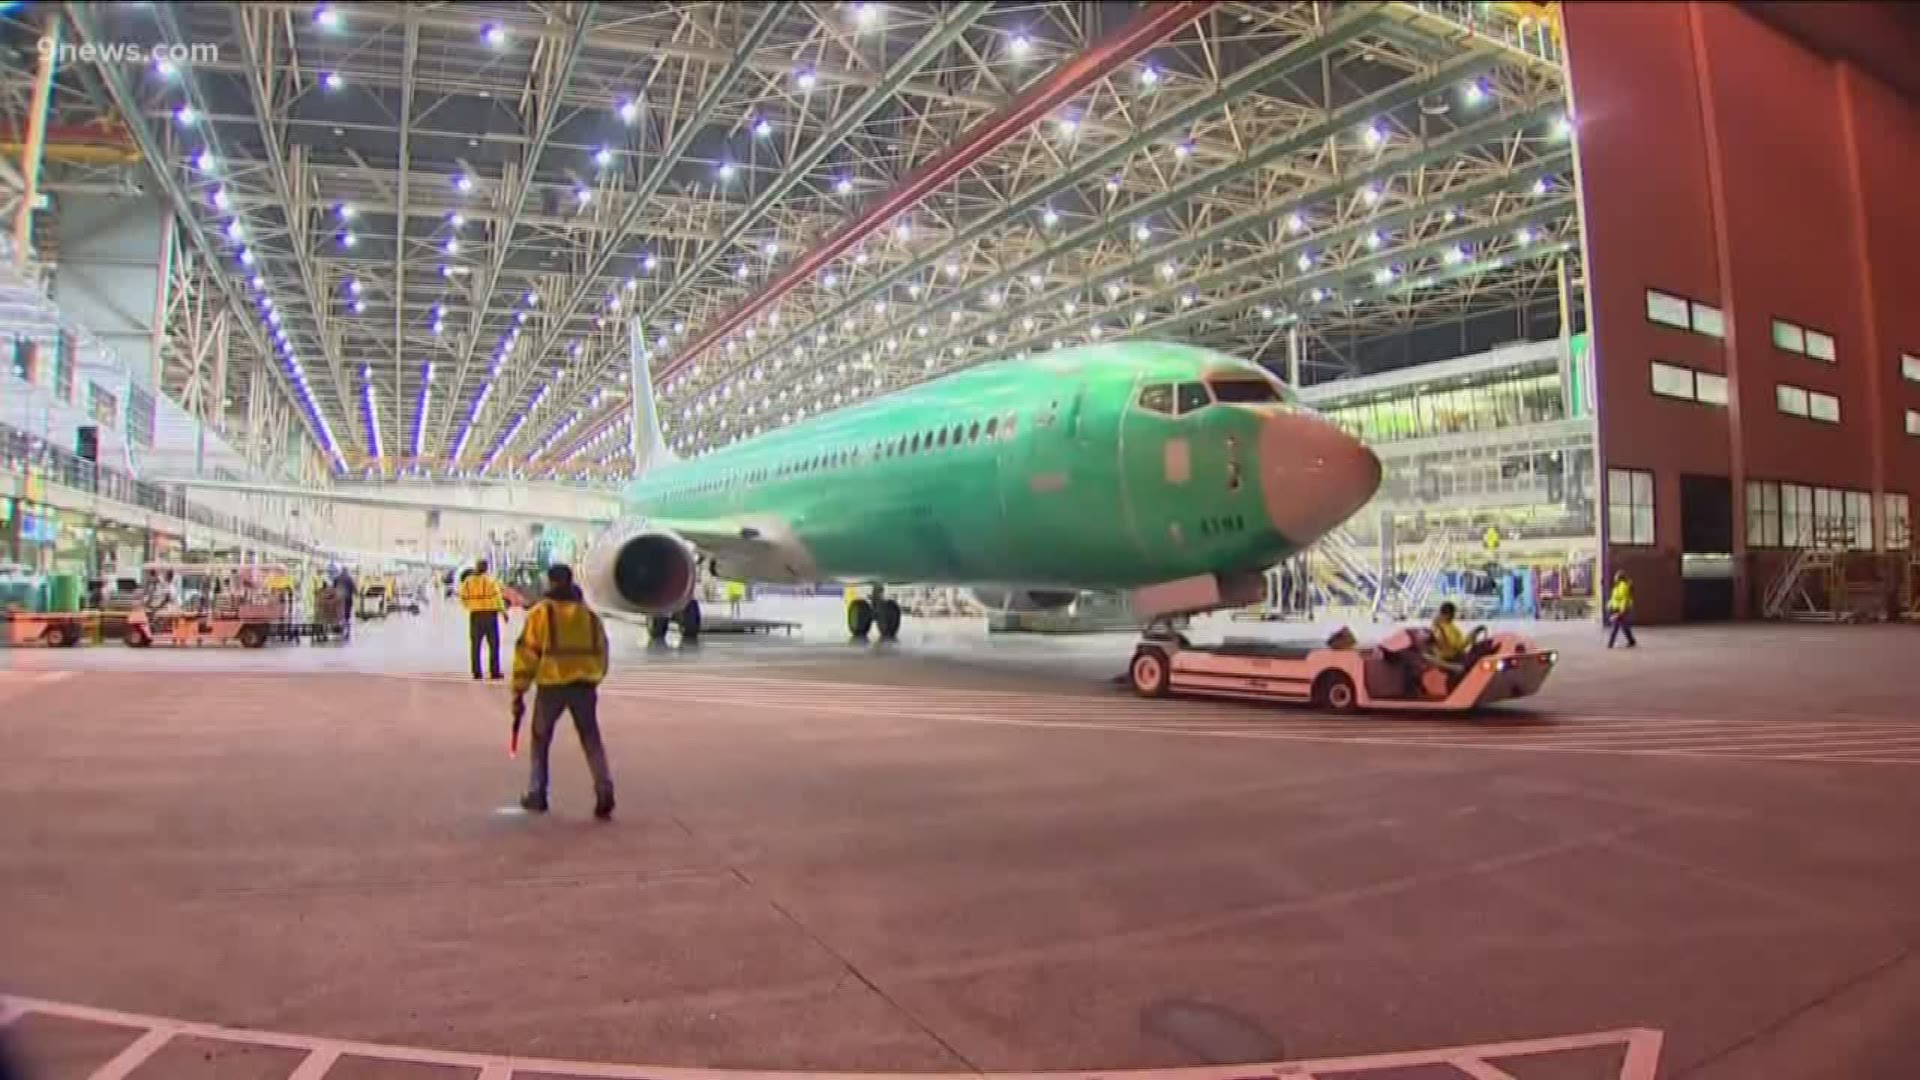 9NEWS aviation expert Greg Feith has been in contact with executives at Boeing, major airlines, the FAA. He talks more on the temporary stoppage in production.